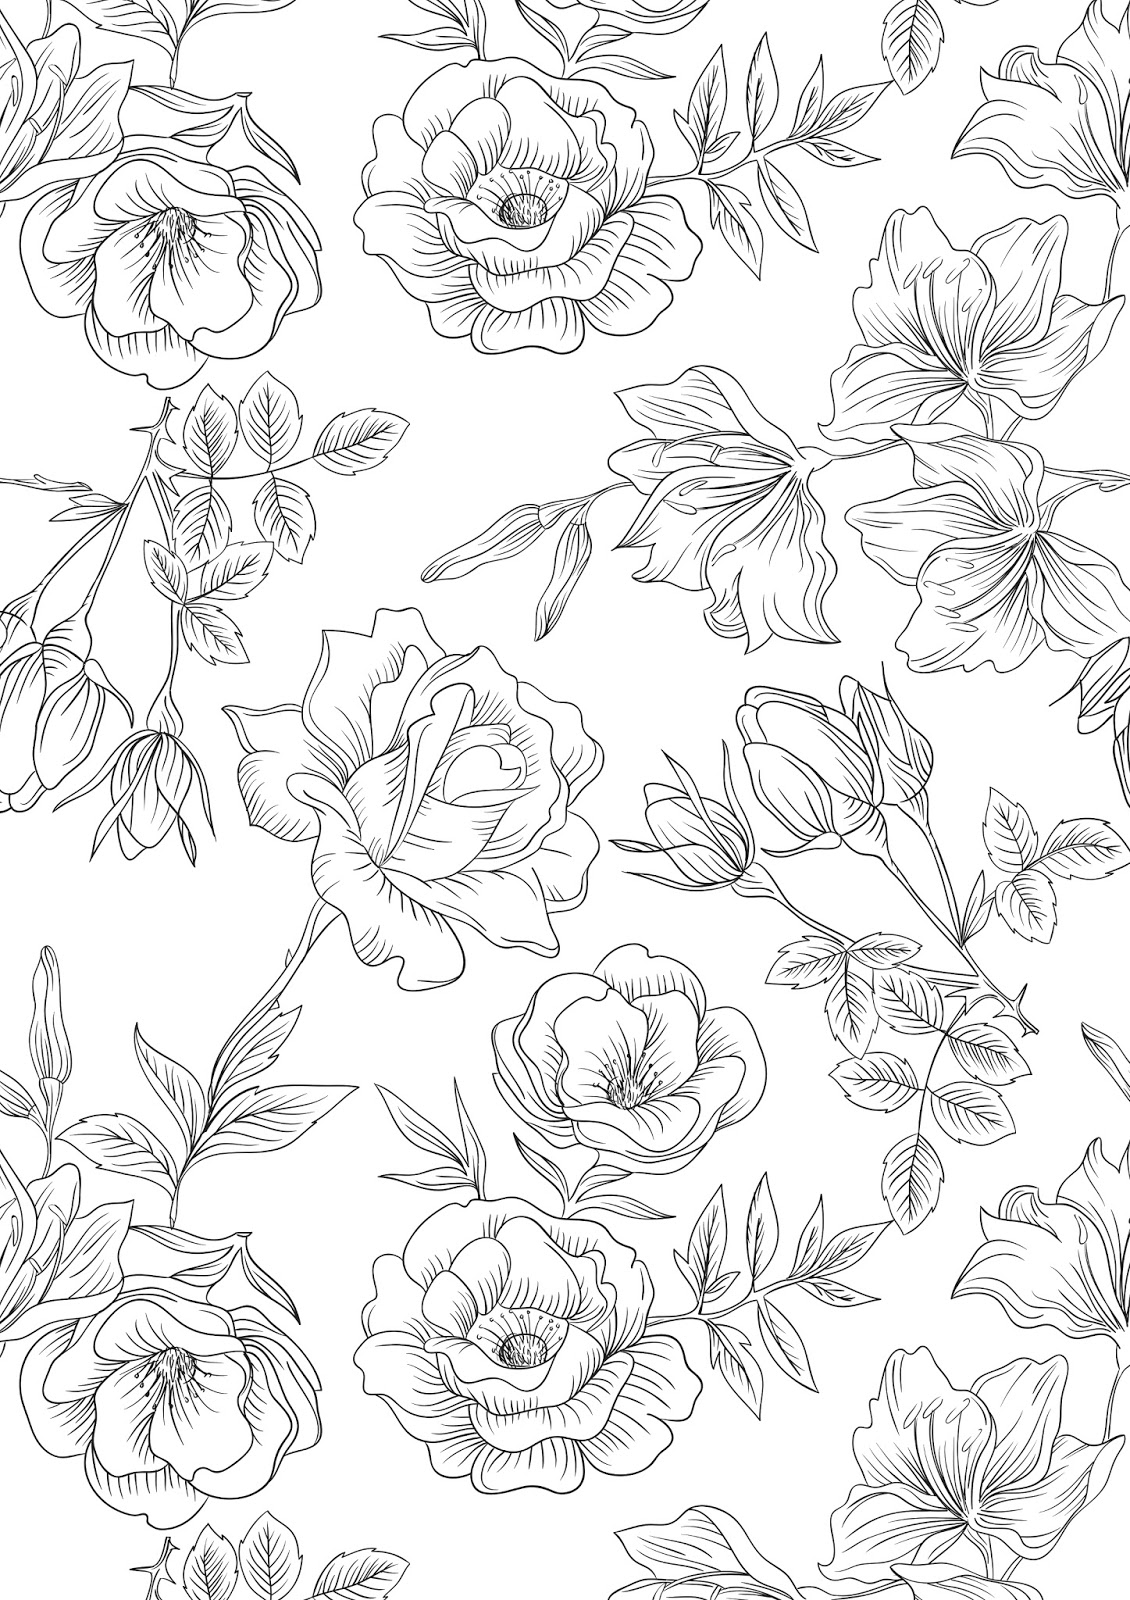 FREE FLORAL PRINTABLE COLOURING SHEETS. | Gathering Beauty